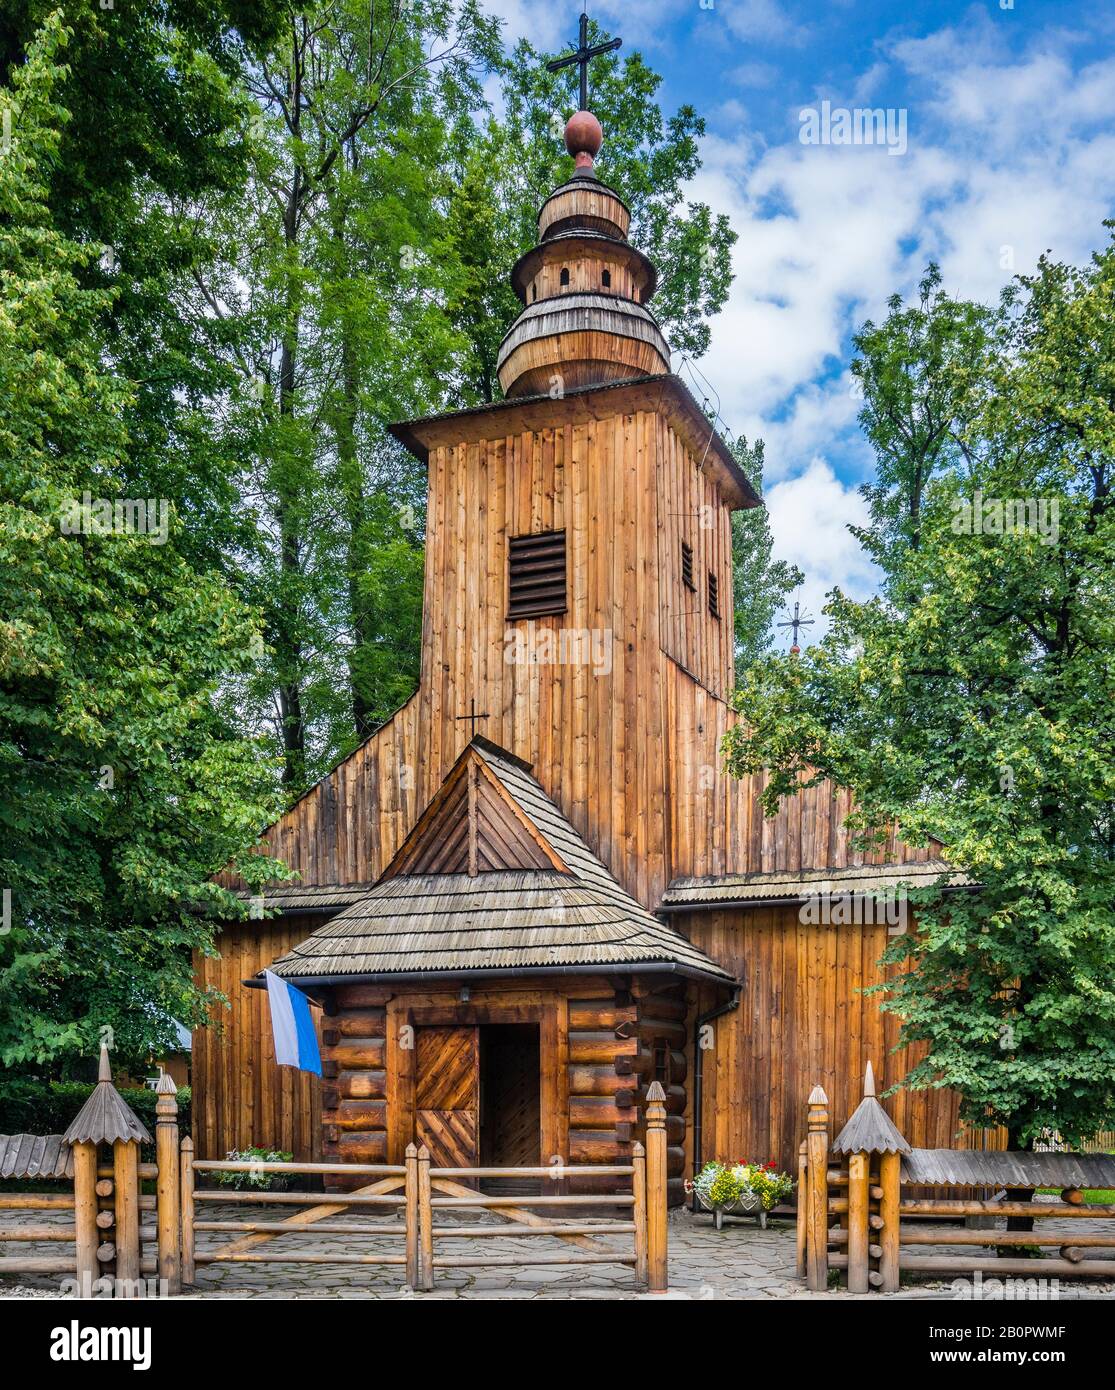 Church of Our Lady of Częstochowa in Zakopane, commonly known as the old church and formerly known as St. Clement’s Church, wooden architecture of a t Stock Photo